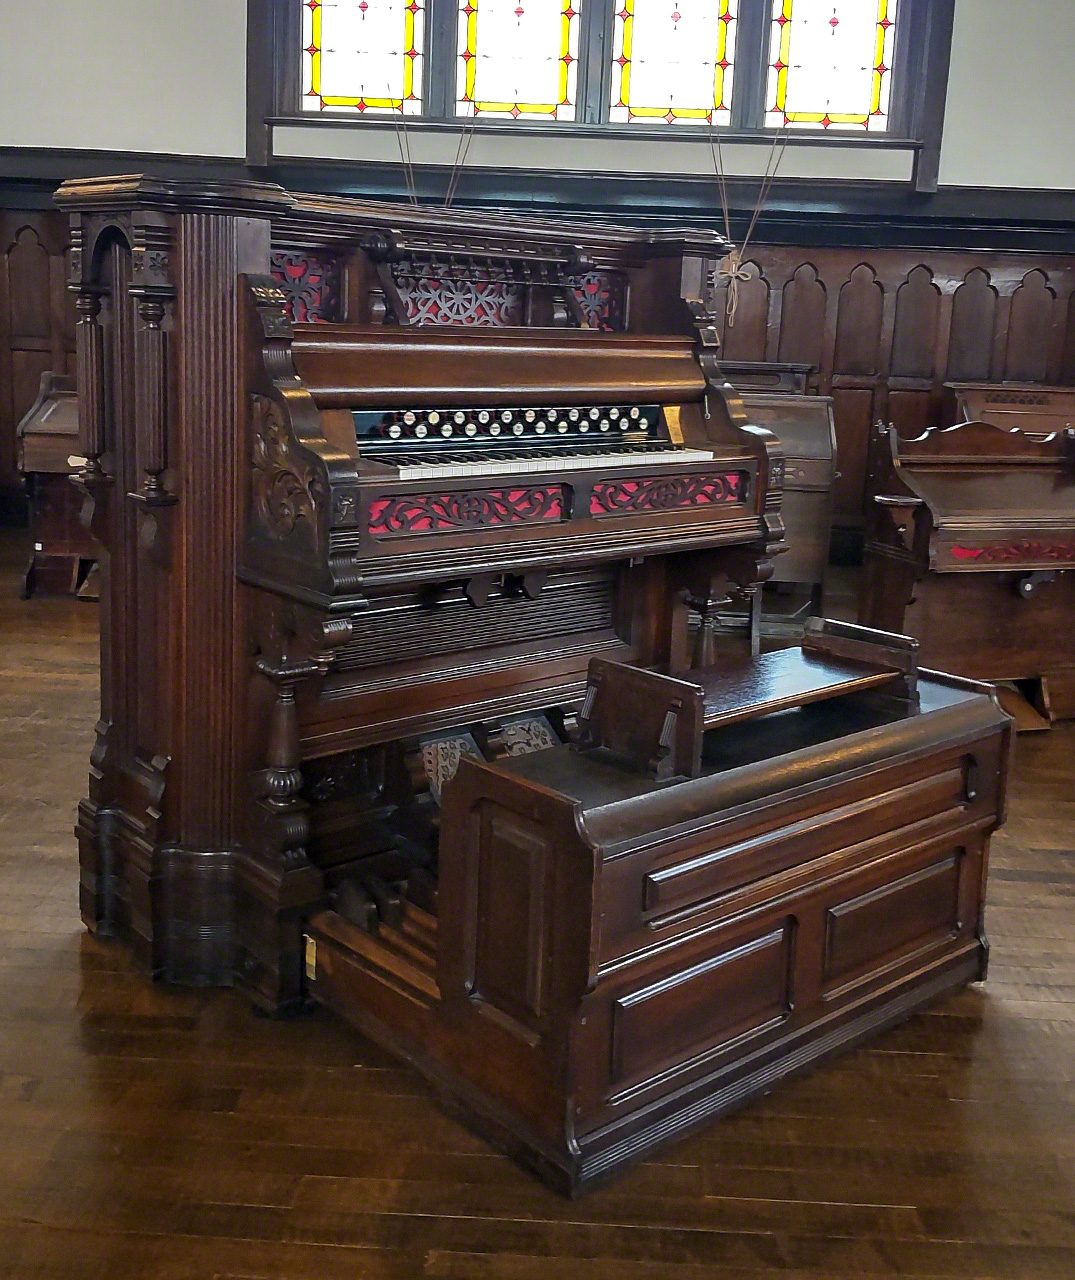 The 1890 American organ still produces music today.